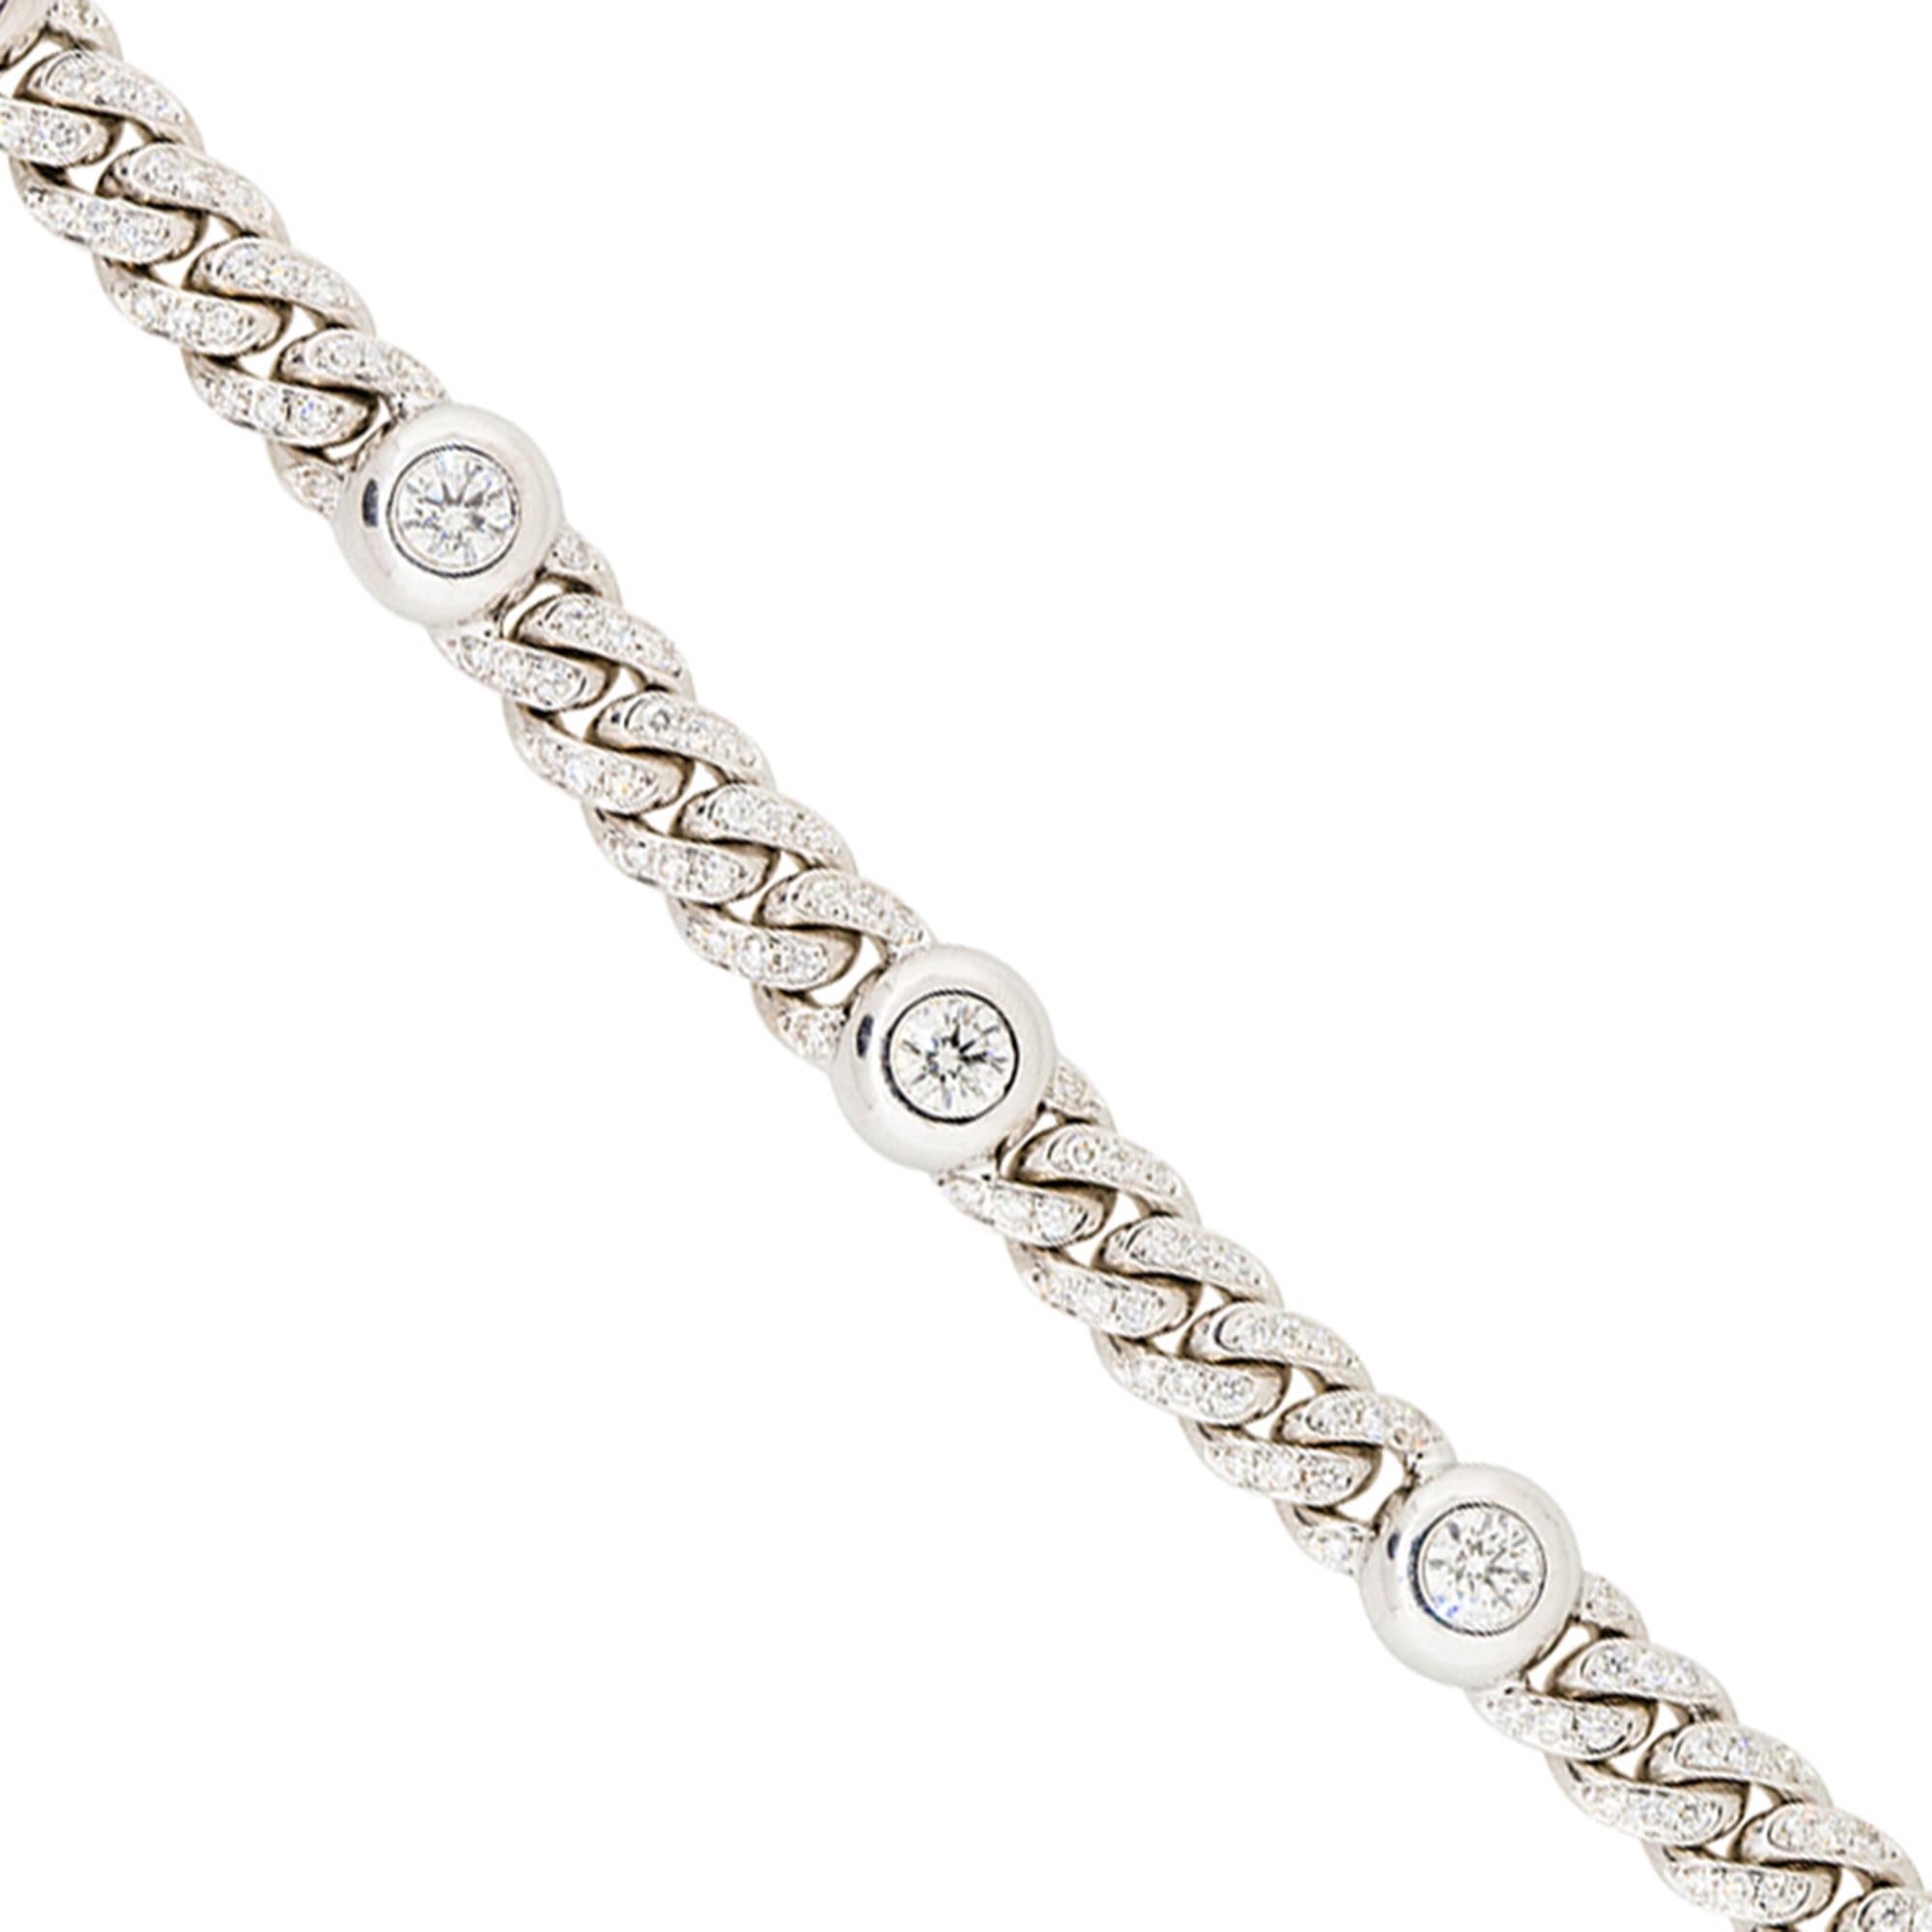 Material: 18K White Gold
Diamond Details: Approx. 5.30ctw of Round Cut Diamonds. This bracelet has 6 large bezel set diamond stations and the whole bracelet is pave diamonds. Diamonds are H/I in color and SI in clarity
Clasp: Tongue In Box